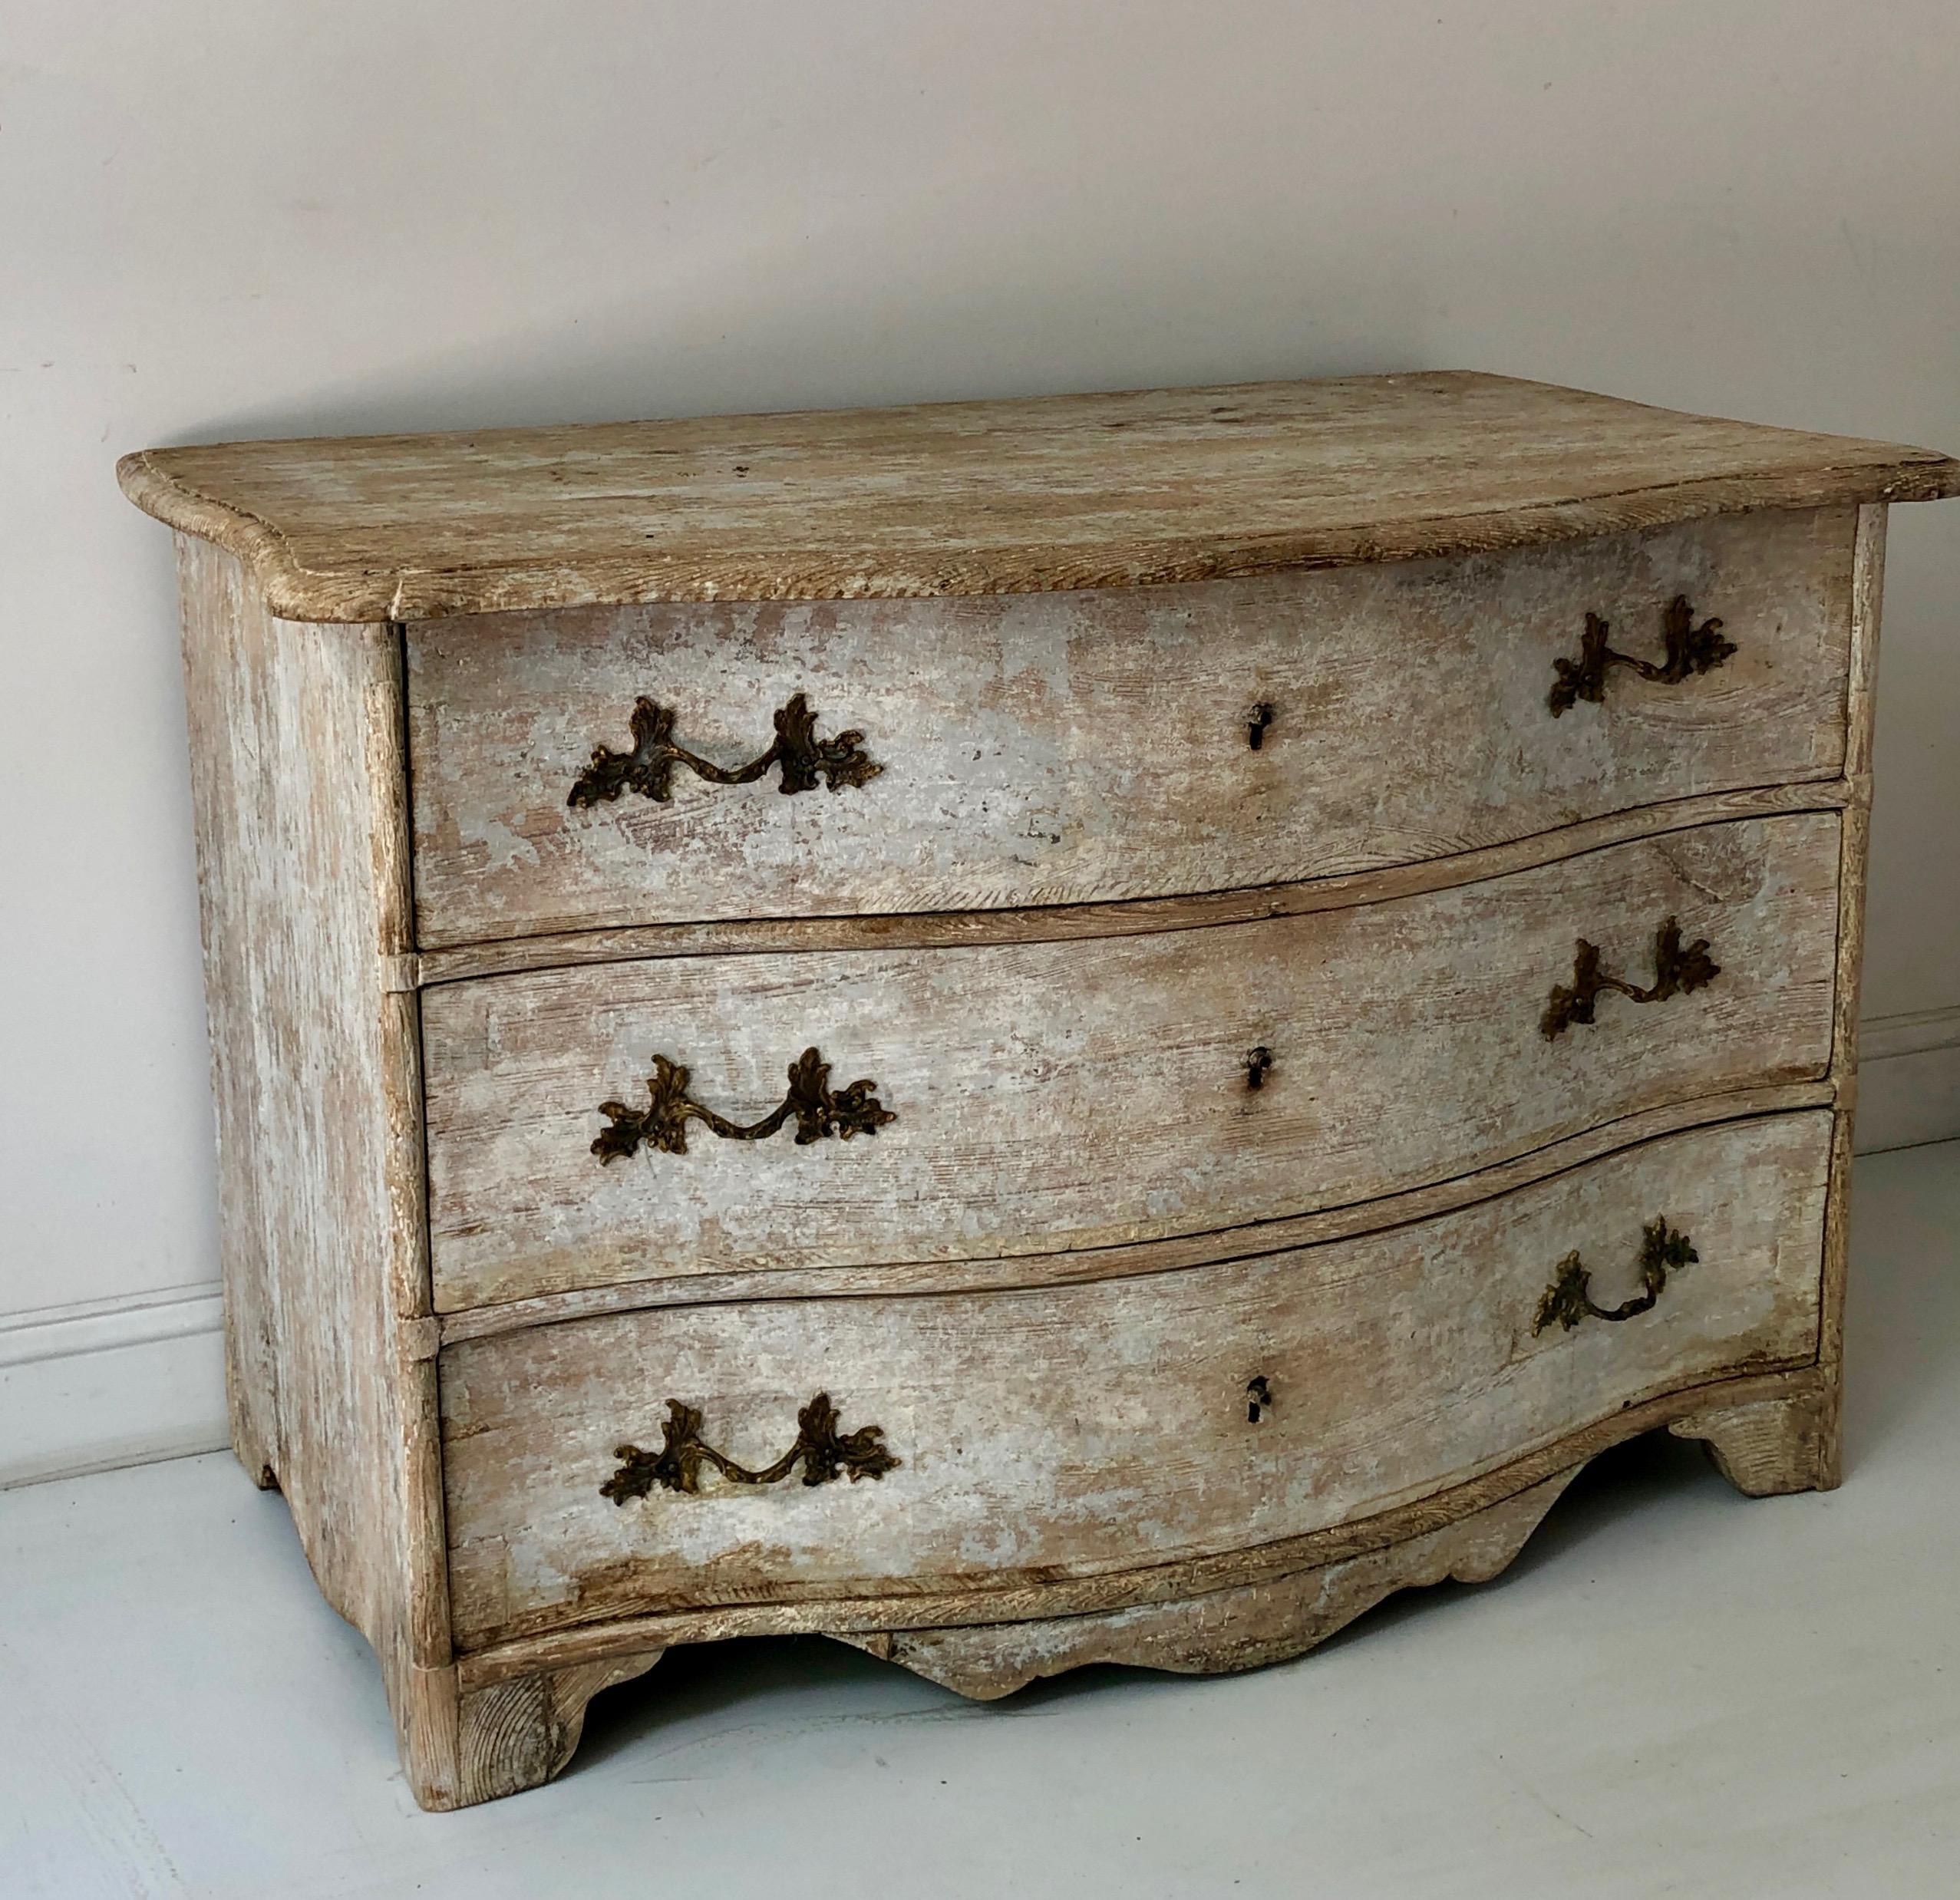 18th century chest of drawers from late Baroque period in richly carved curvaceous serpentine drawer fronts, shaped top and bracket feet in super time worn patina.
Alsace, France.
More than ever, we selected the best, the rarest, the unusual, the